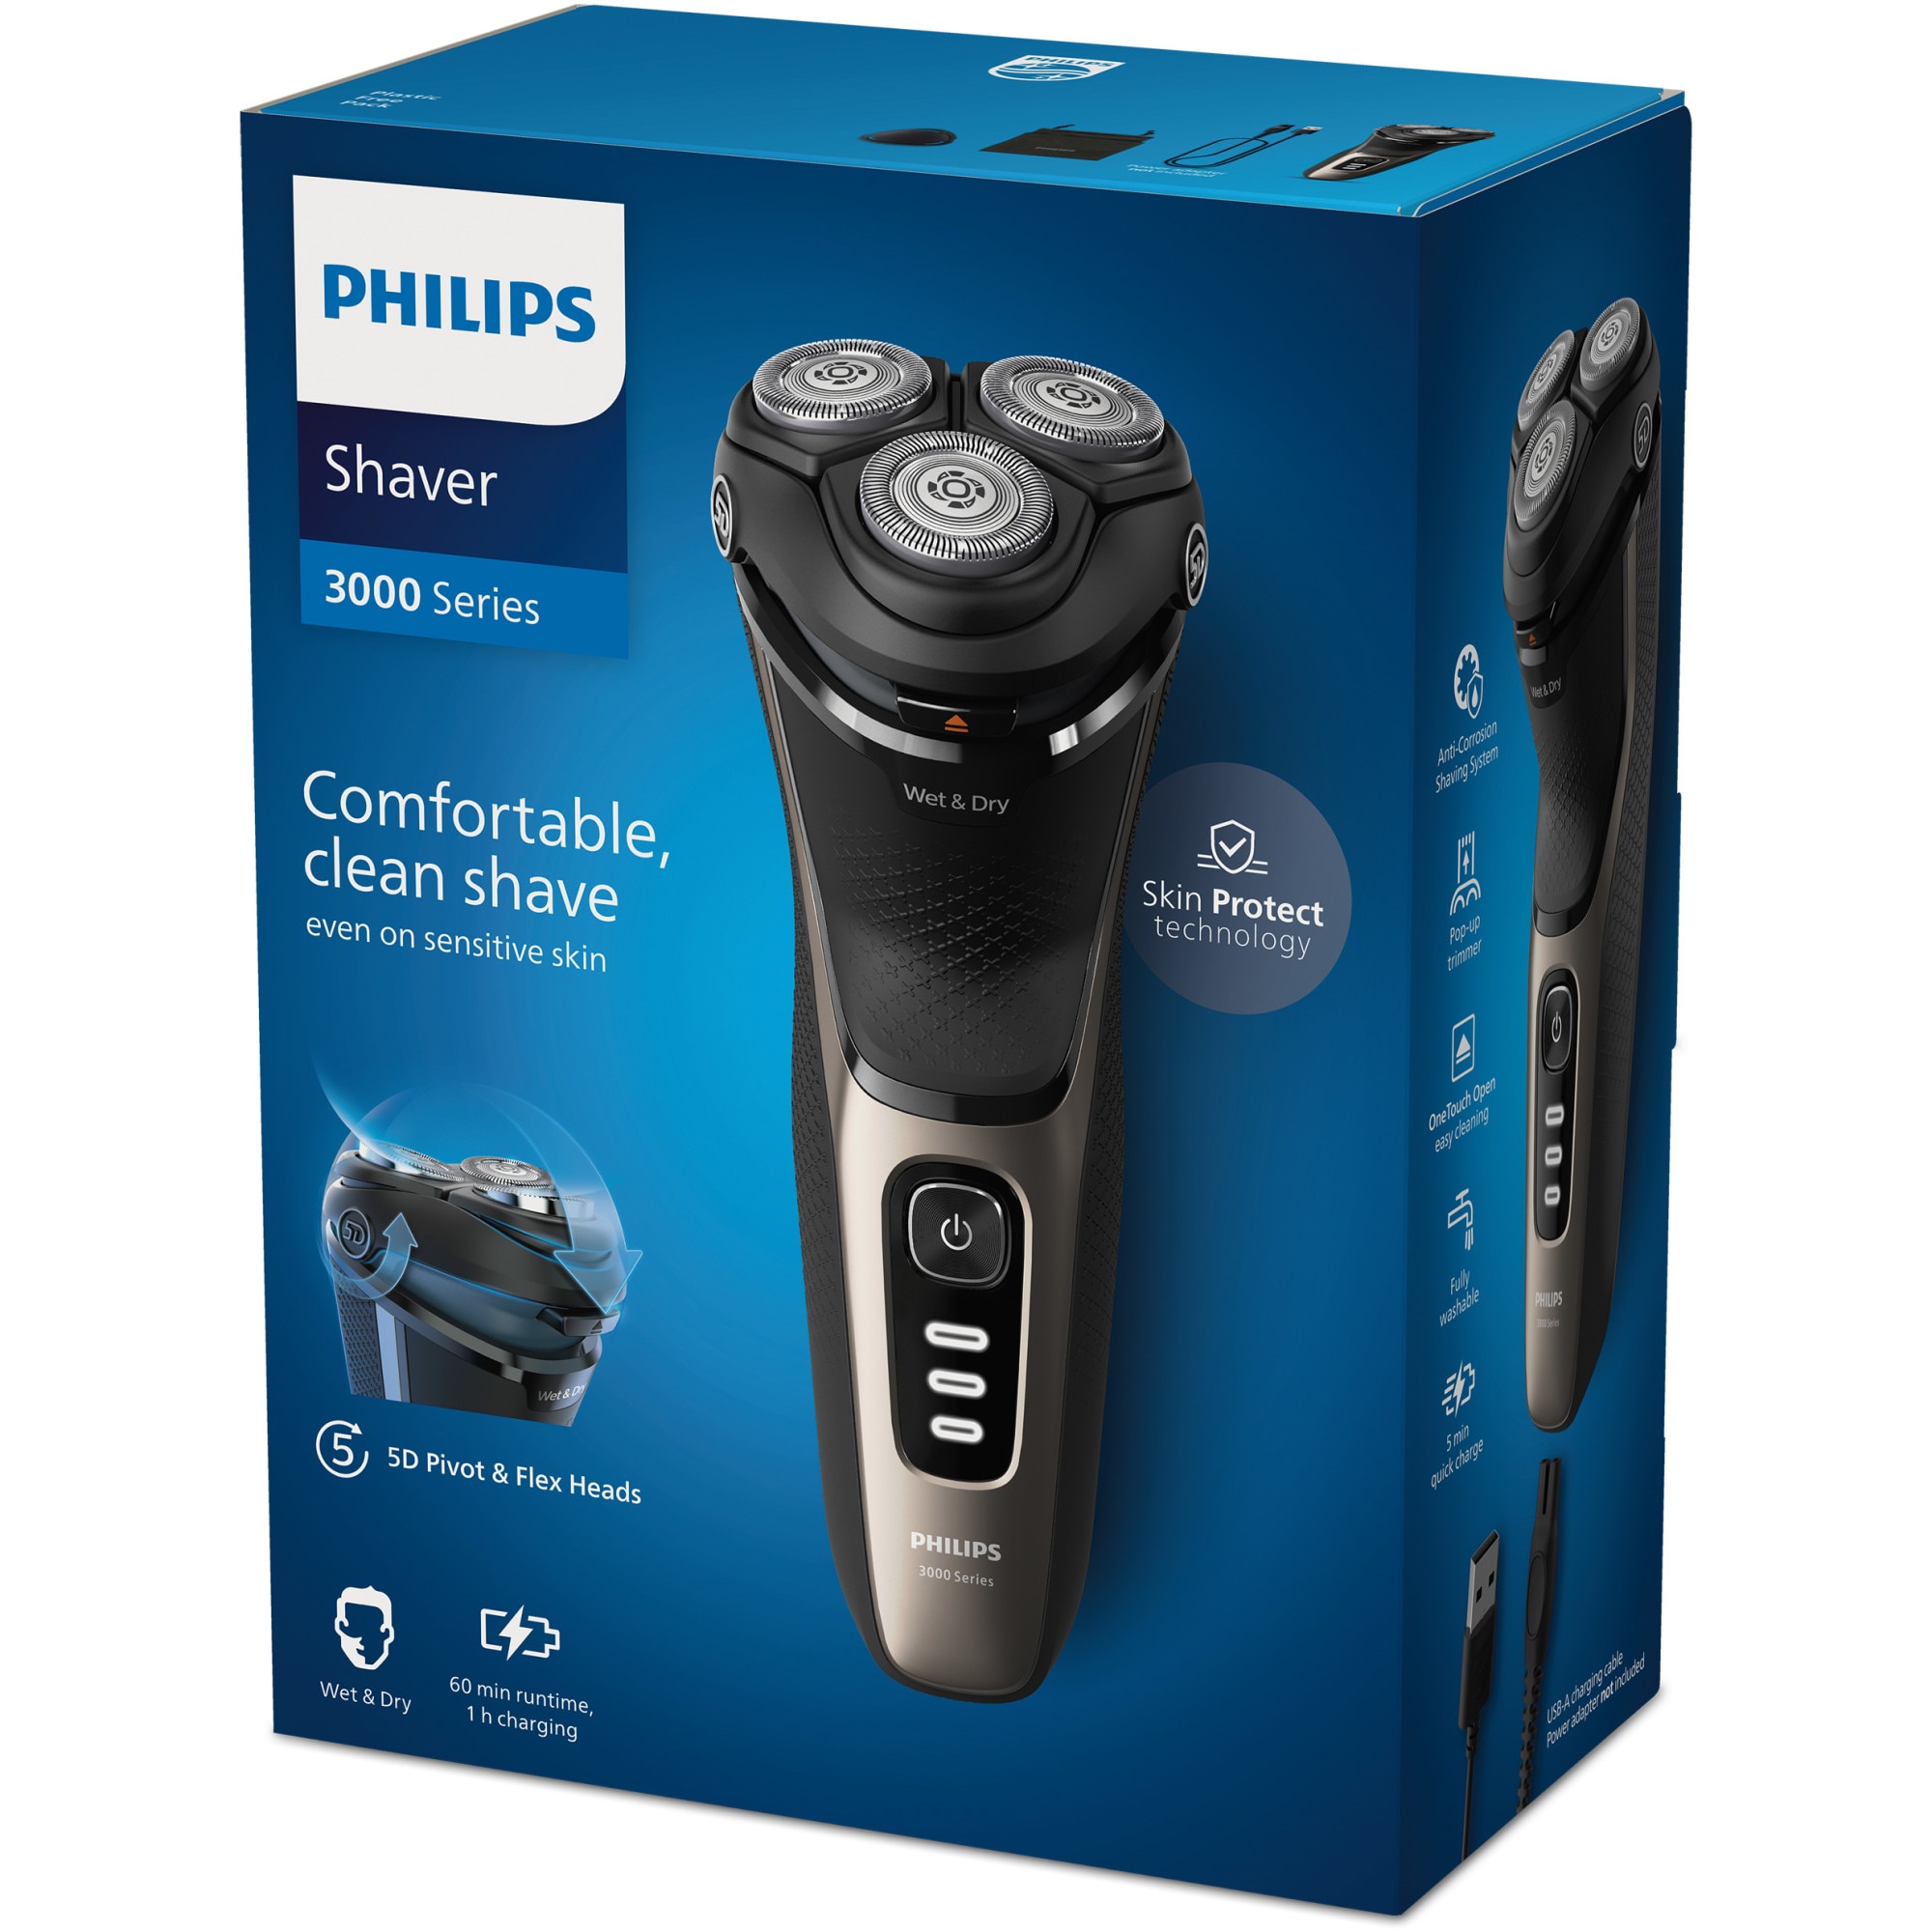 Philips Series 3000 S3242/12 Wet & Dry Electric Shaver with 5D Flex & Pivot  Heads, Travel Pouch & Pop-up Trimmer, Ash Gold